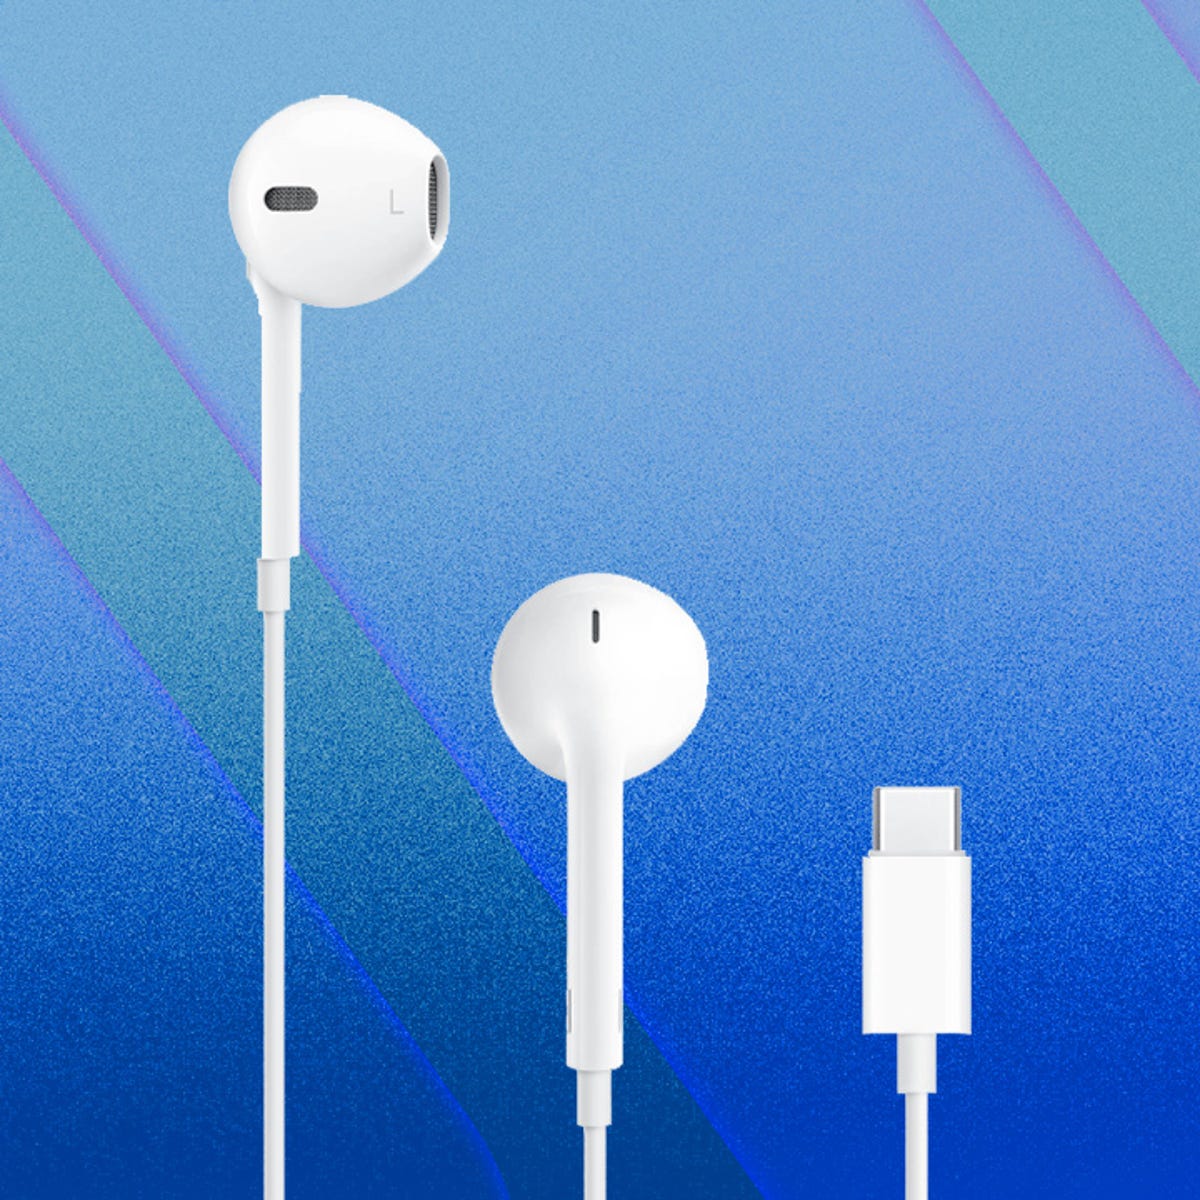 Apple's $17 EarPods with USB-C is my impulse purchase for Black